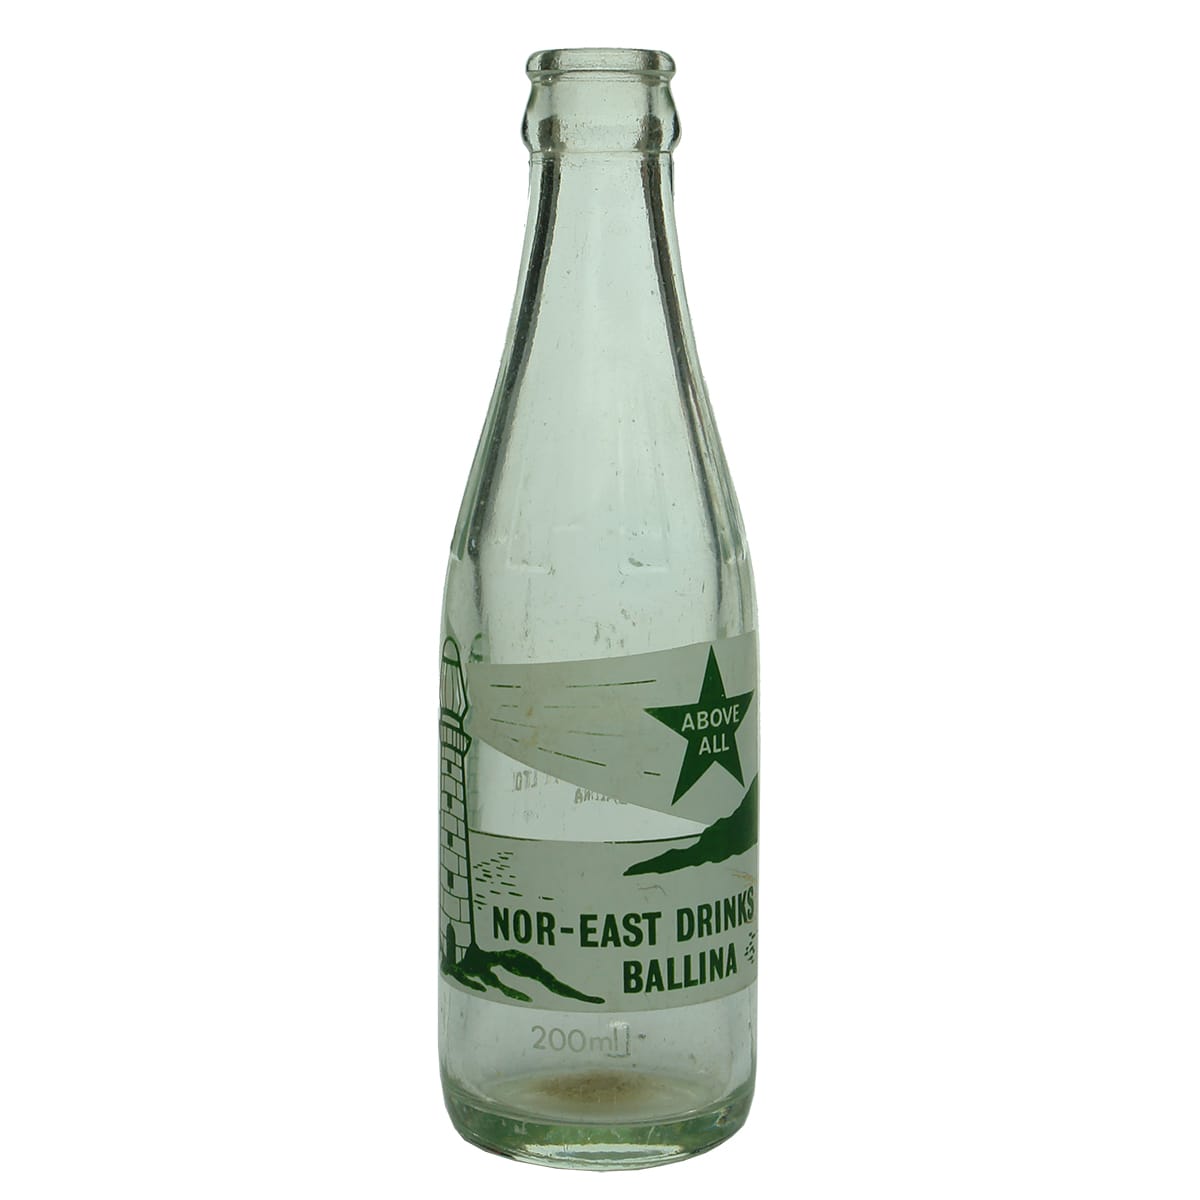 Crown Seal. Nor-East Drinks, Ballina. Ceramic Label. 200 ml. (New South Wales)